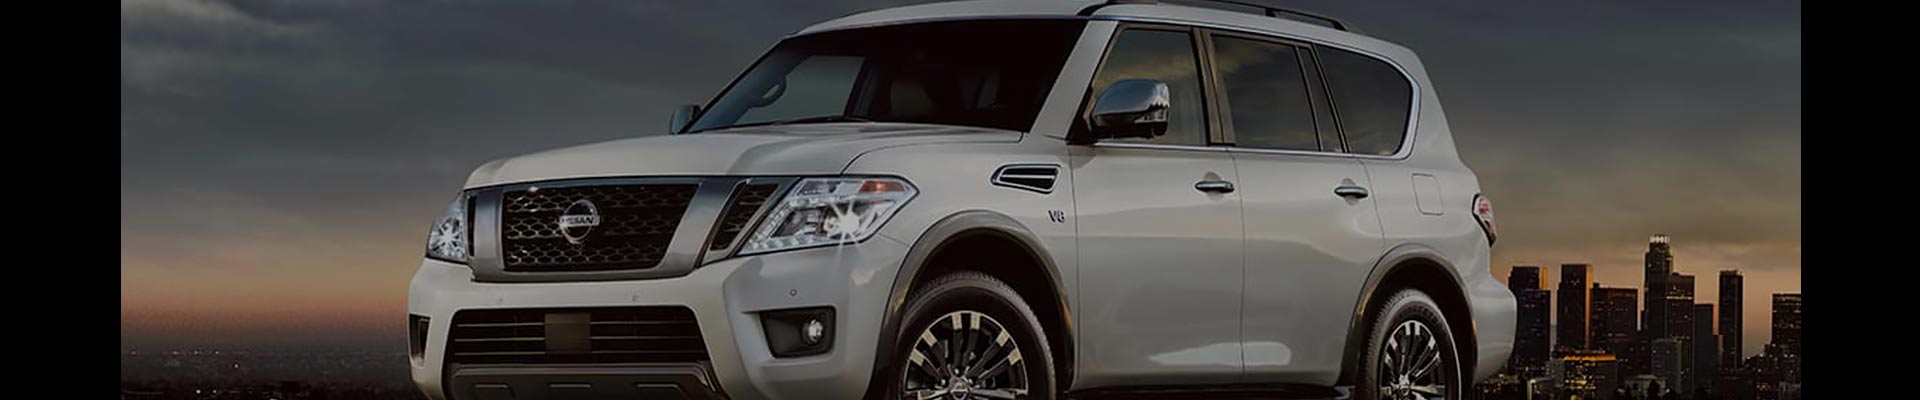 Shop Replacement and OEM 2008 Nissan Armada Parts with Discounted Price on the Net